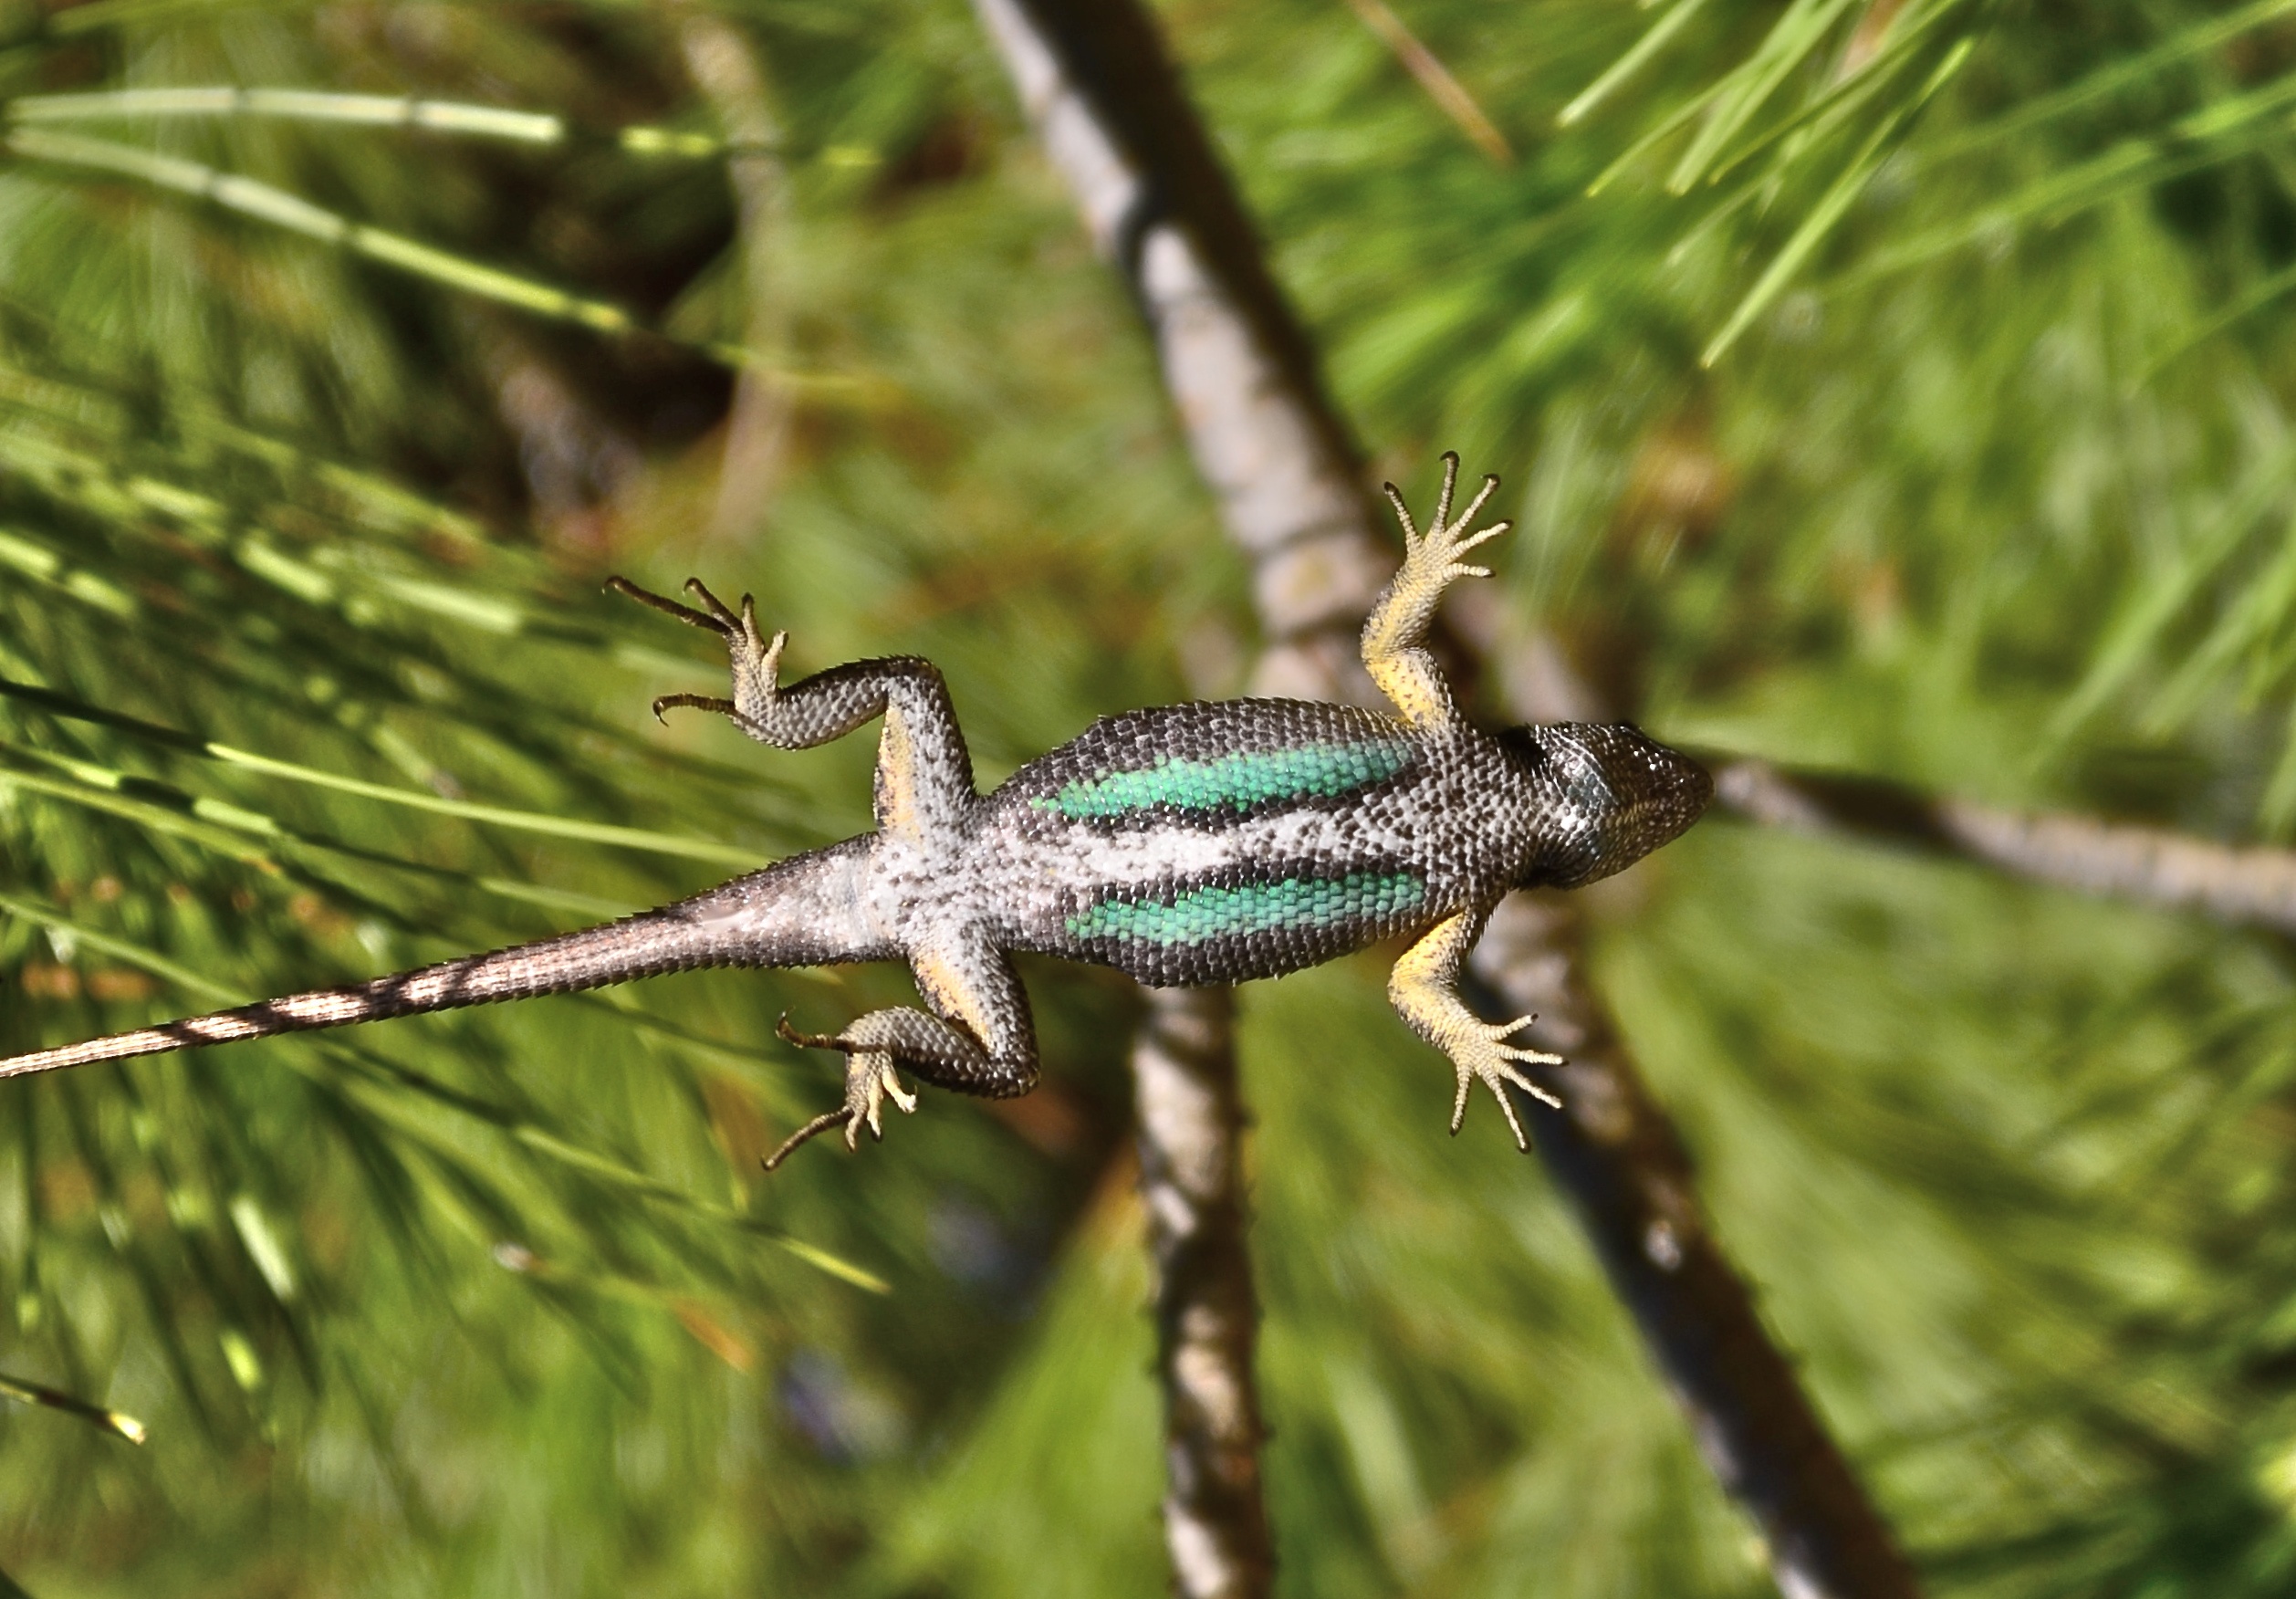 Bay Nature: How Can You Tell Male from Female Lizards?